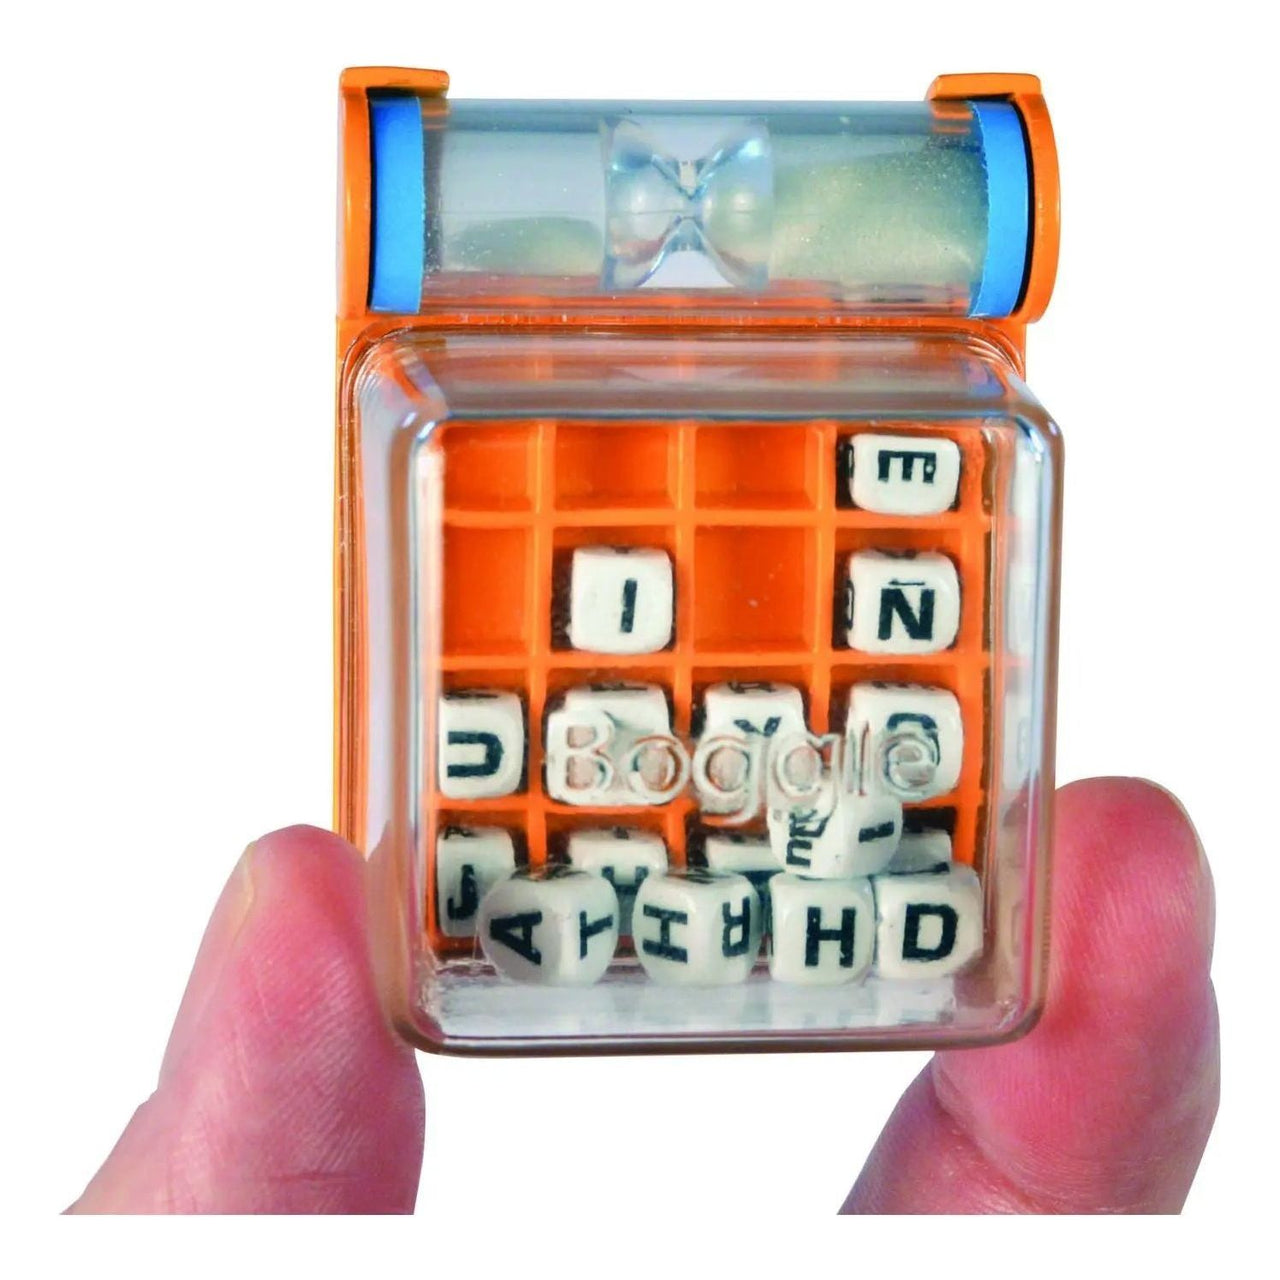 World's Smallest Boggle World's Smallest